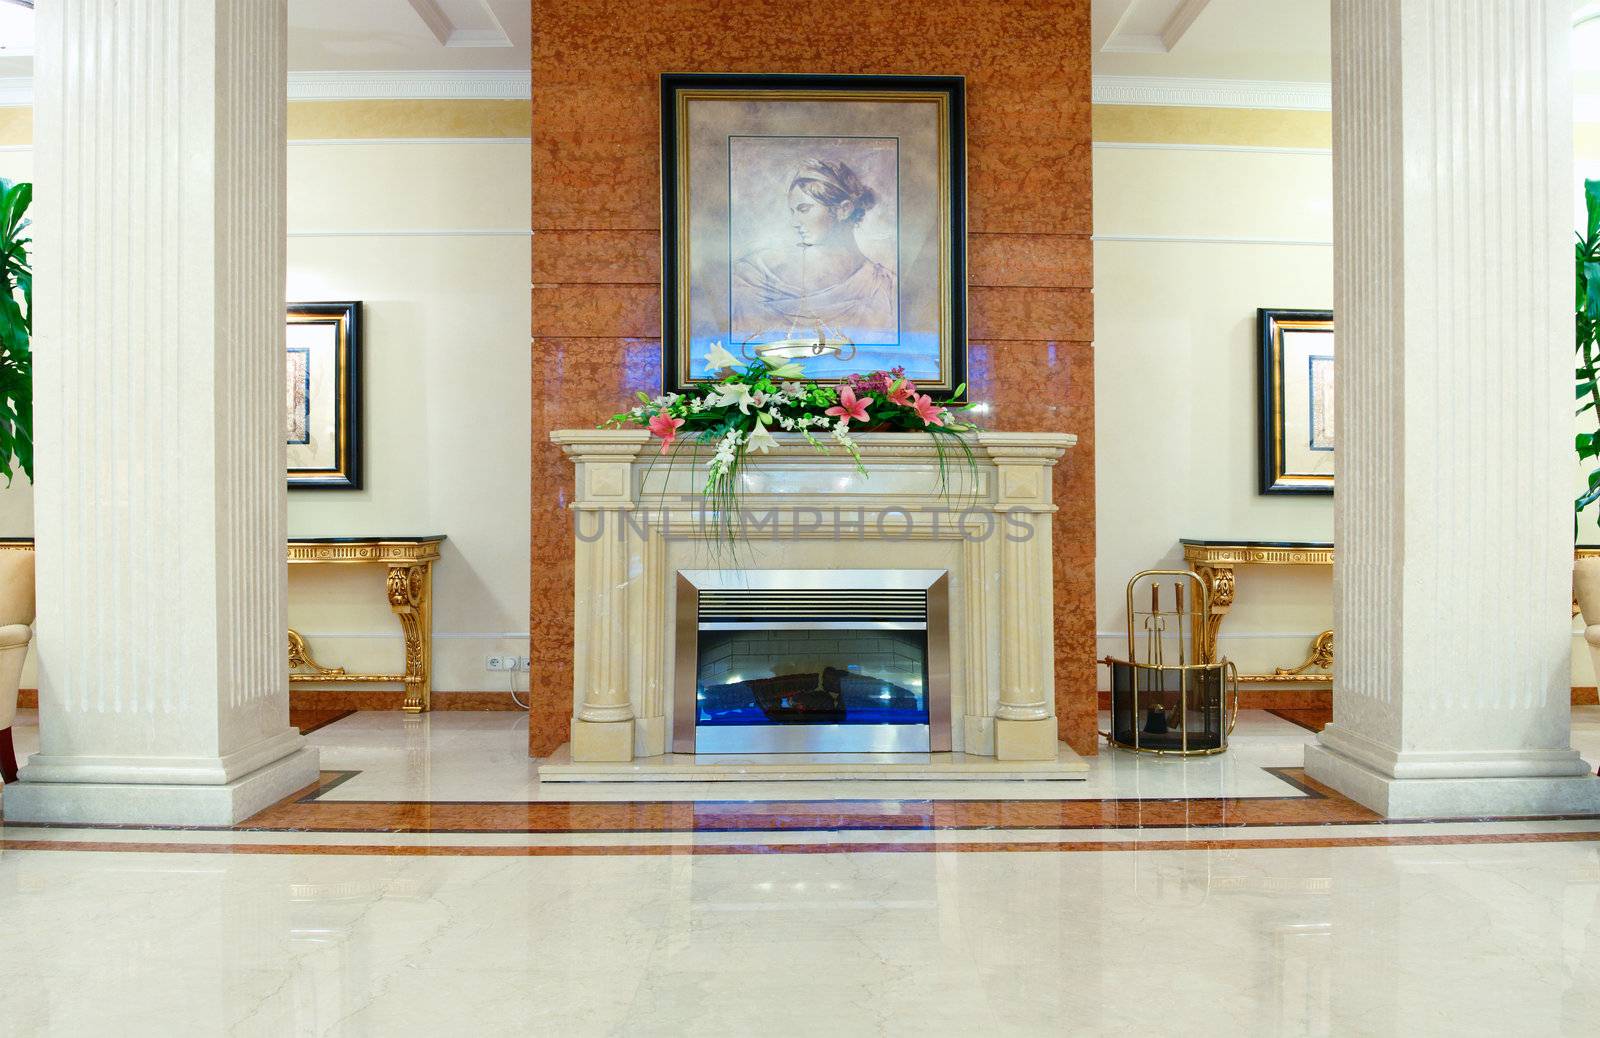 Fireplace in the Living Room in Luxury Home